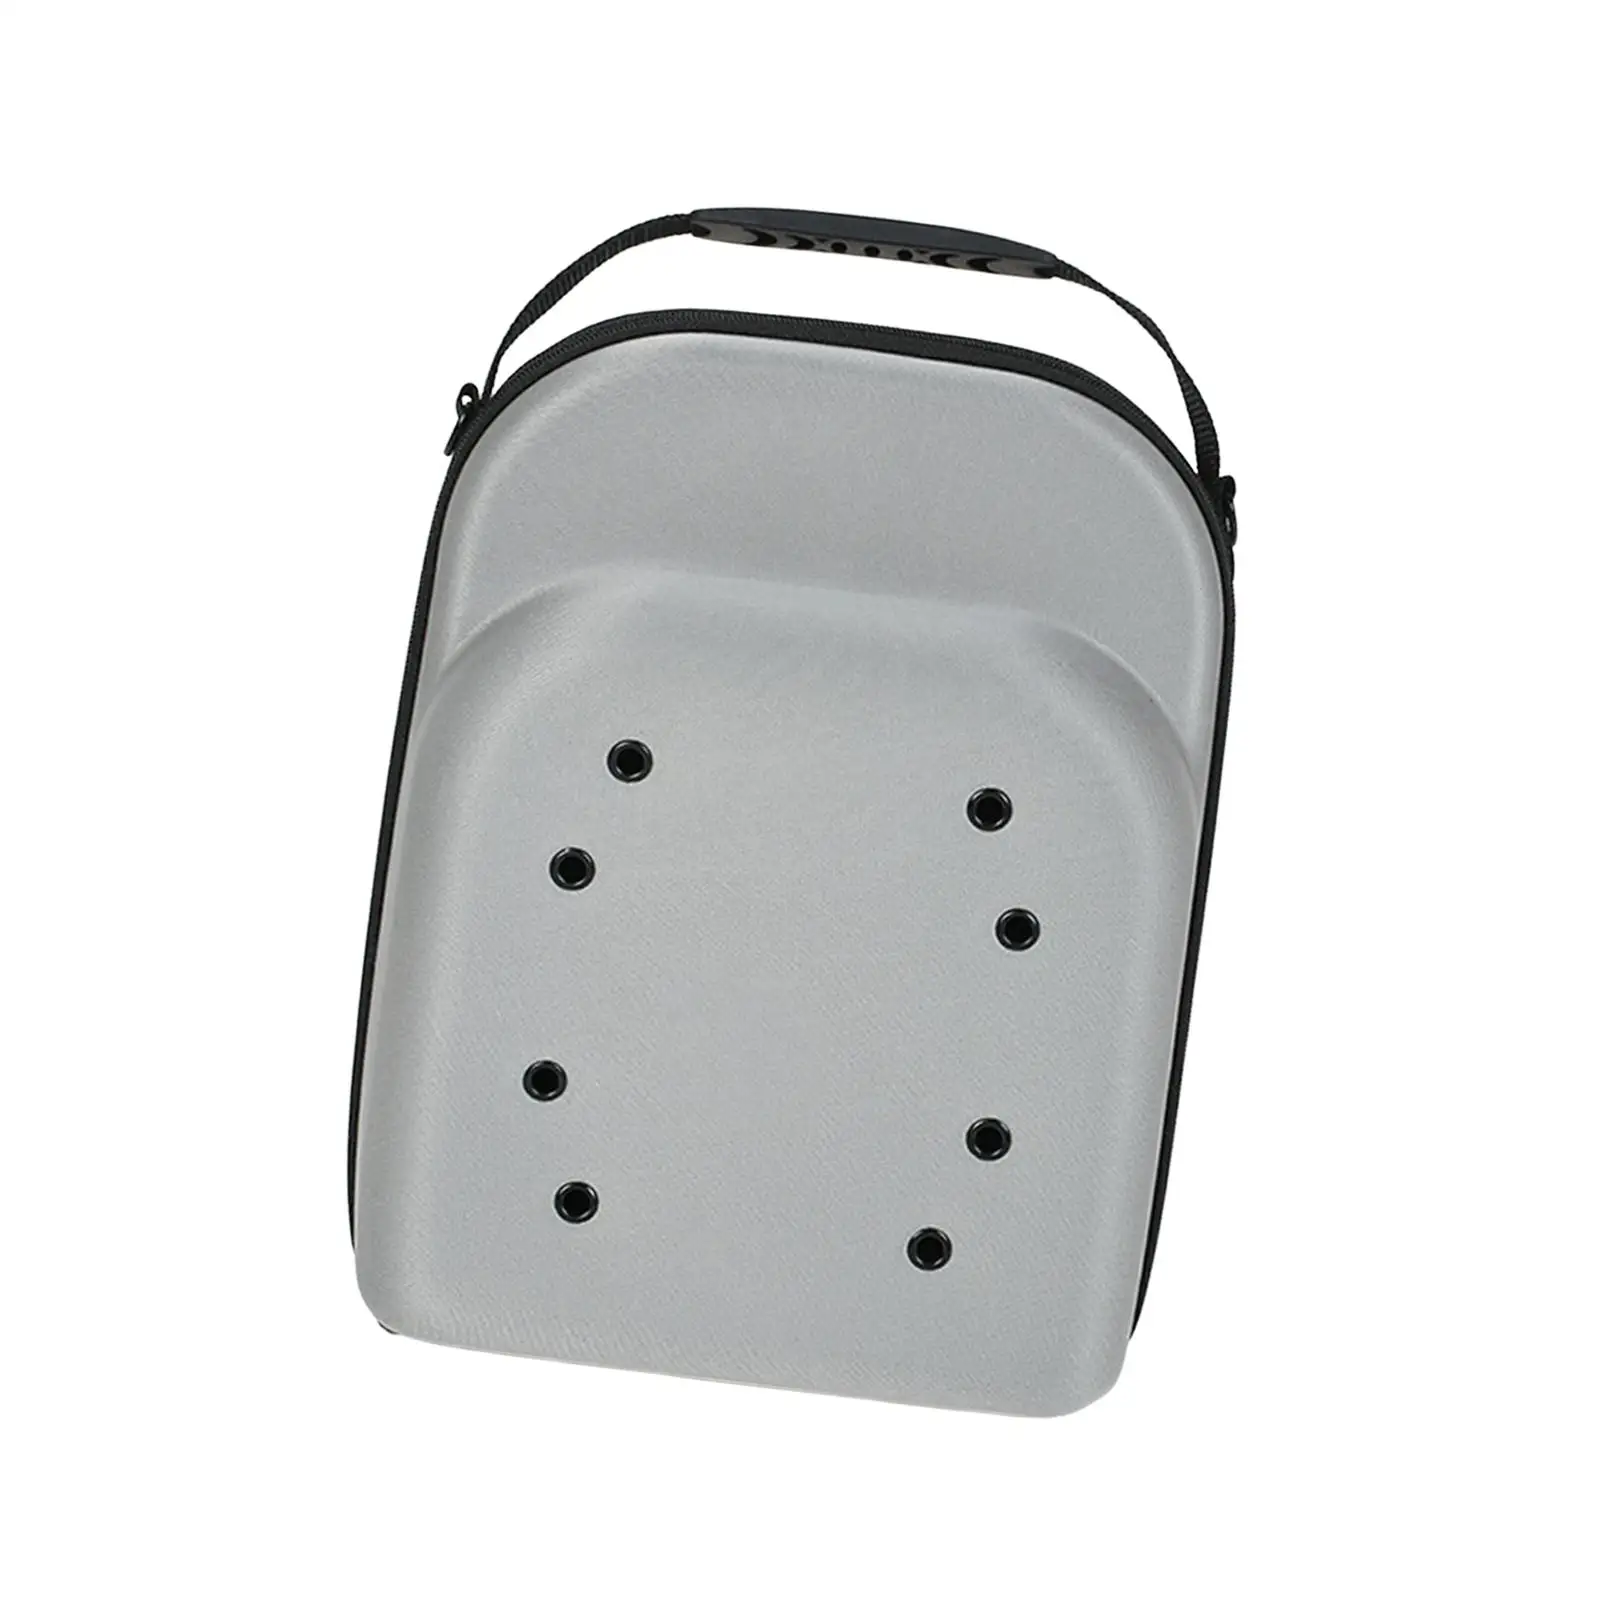 Hard Hat Case Storage Carrier Box Cap Carrying Bag Suitcase Cap Carrier with Carrying Handle for Travel Household Men Women